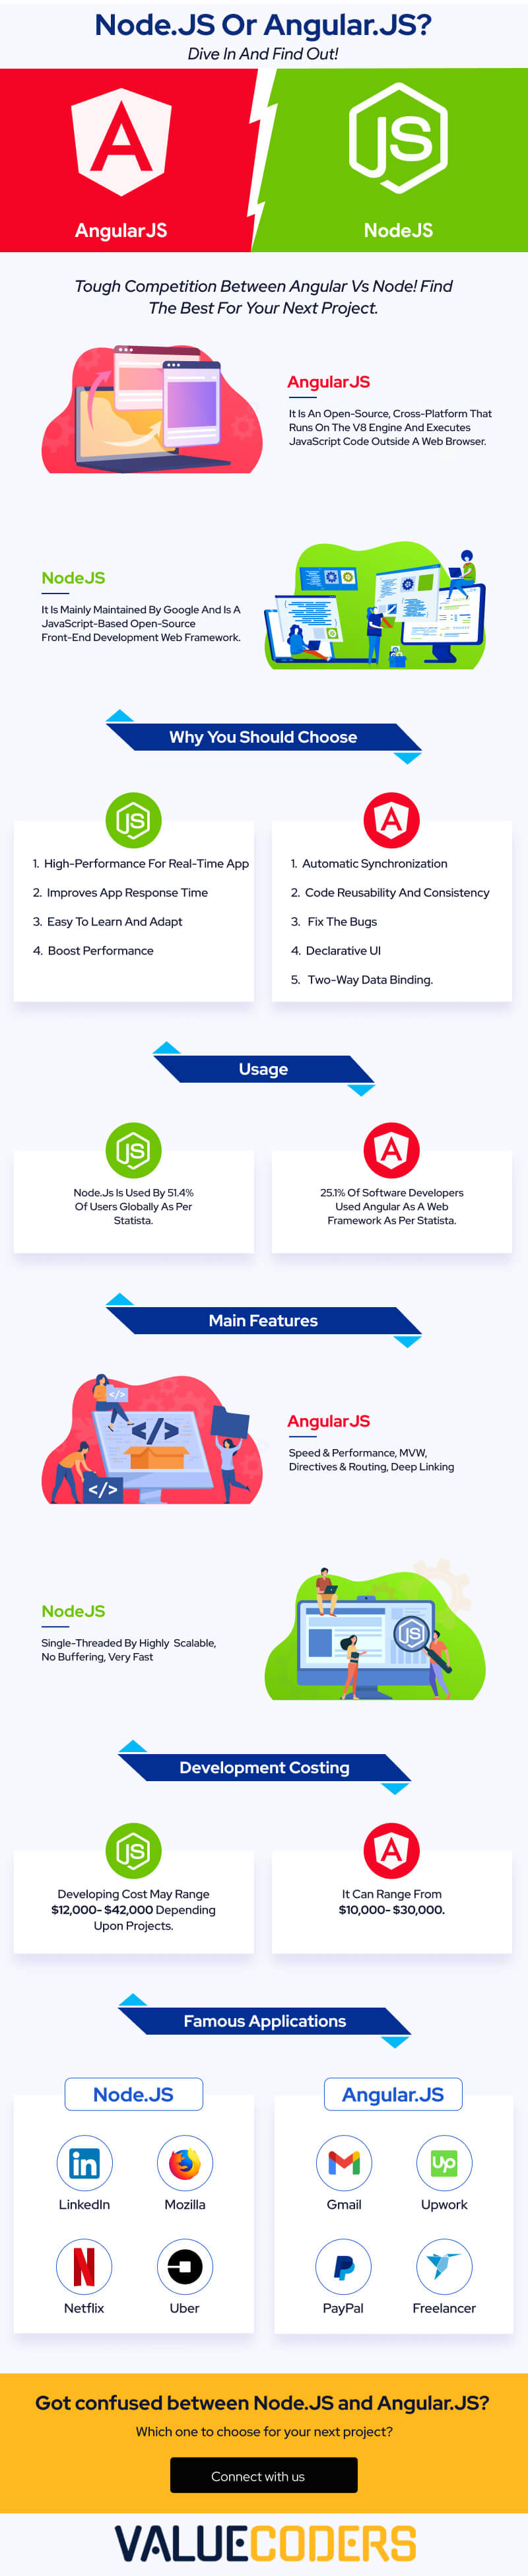 Node VS Angular || Choose the best one for your project | Infographic